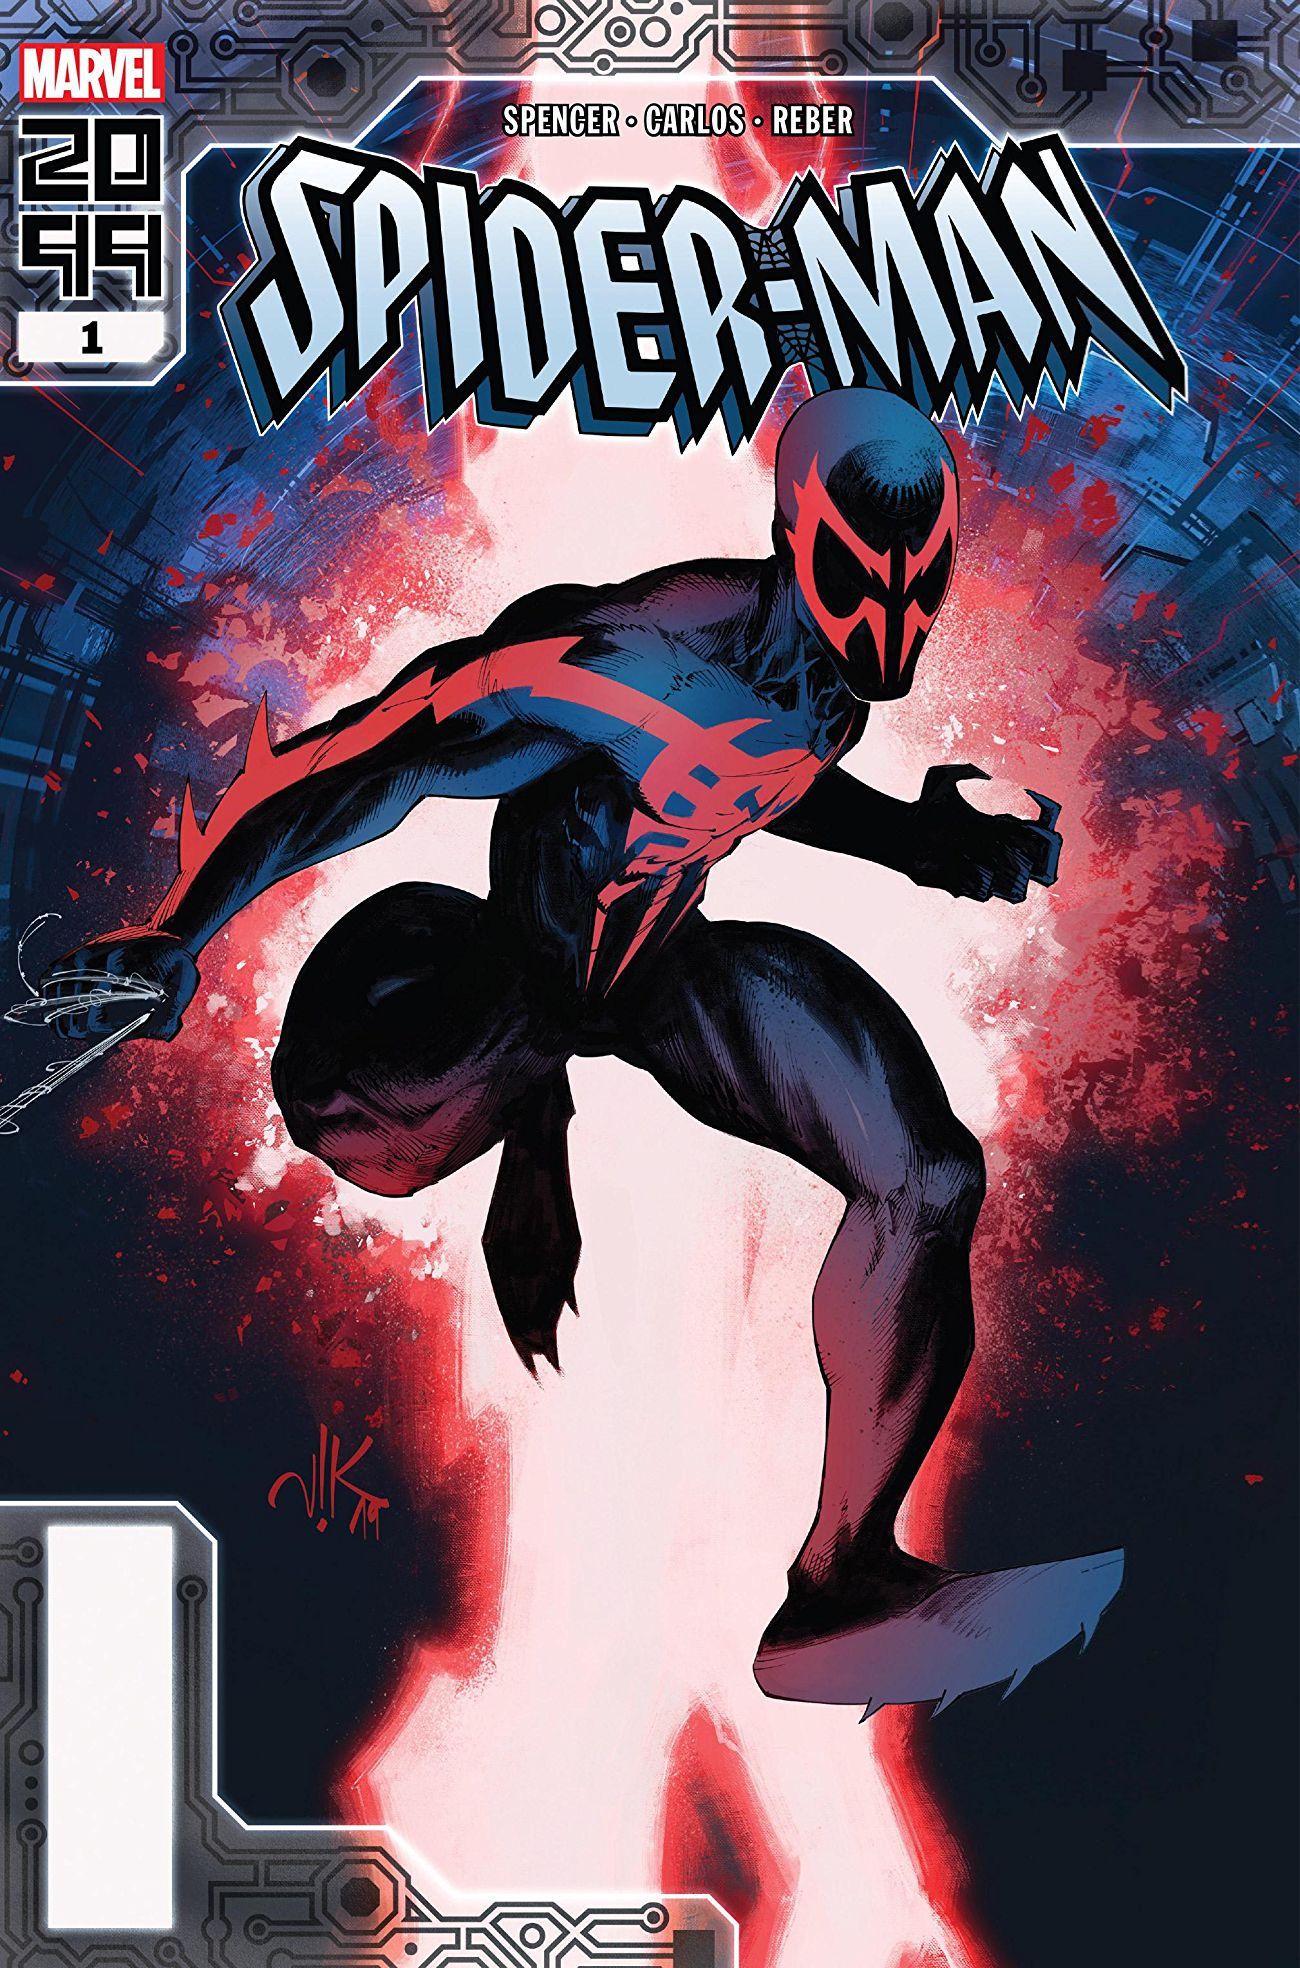 Marvel’s SPIDER-MAN 2099 Getting a New Origin Story?